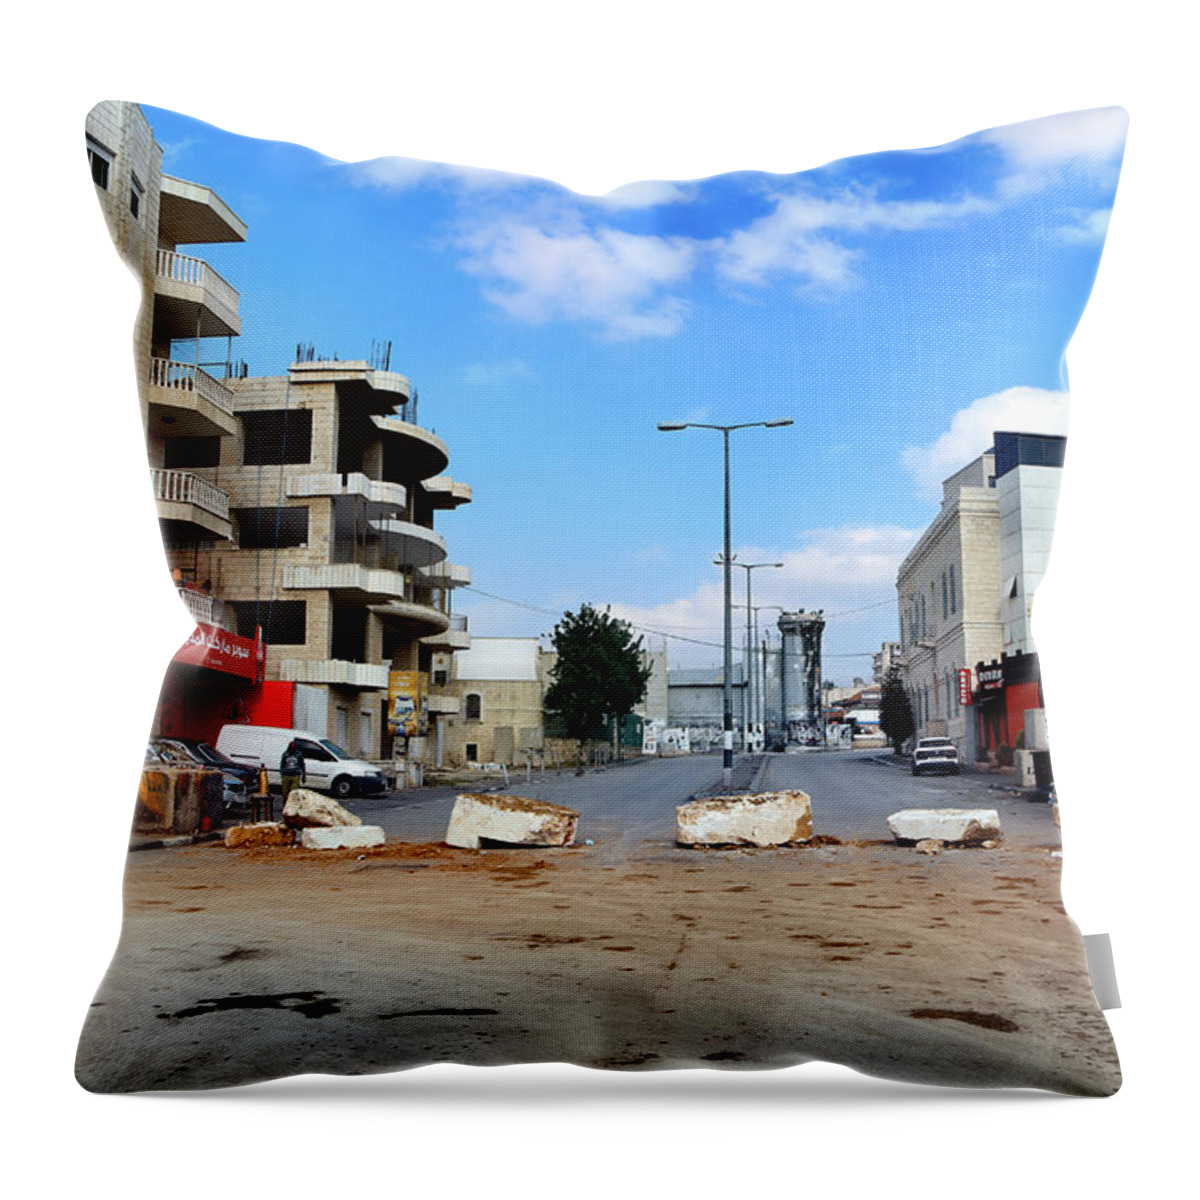 Street Throw Pillow featuring the photograph No Roaming in Bethlehem by Munir Alawi